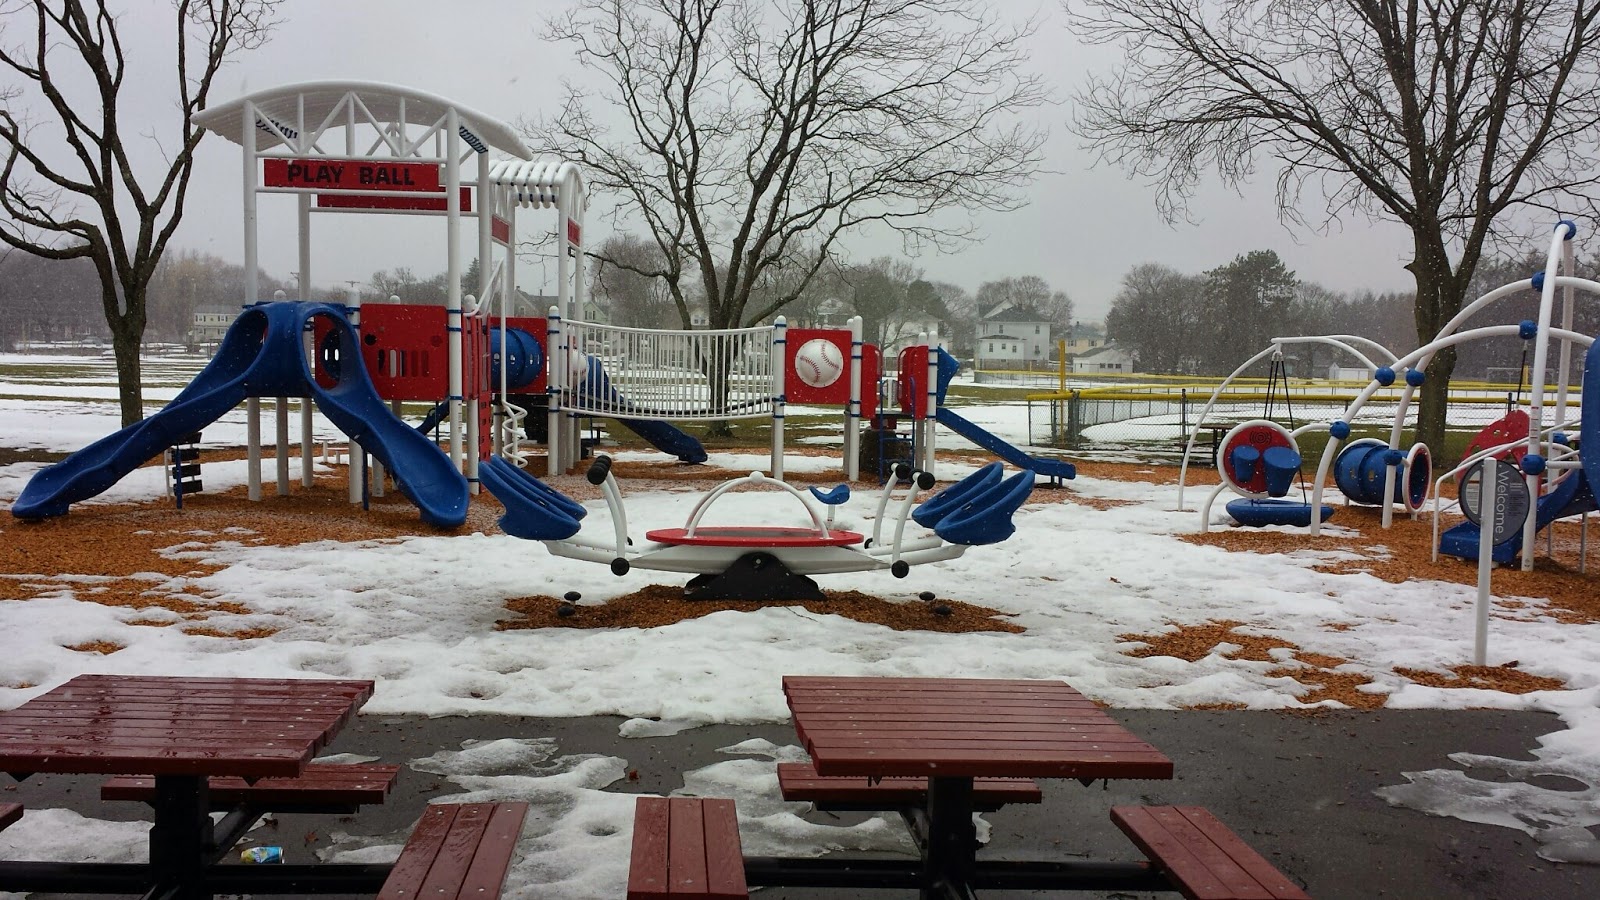 almost ready for kids to play on! (snow melting)